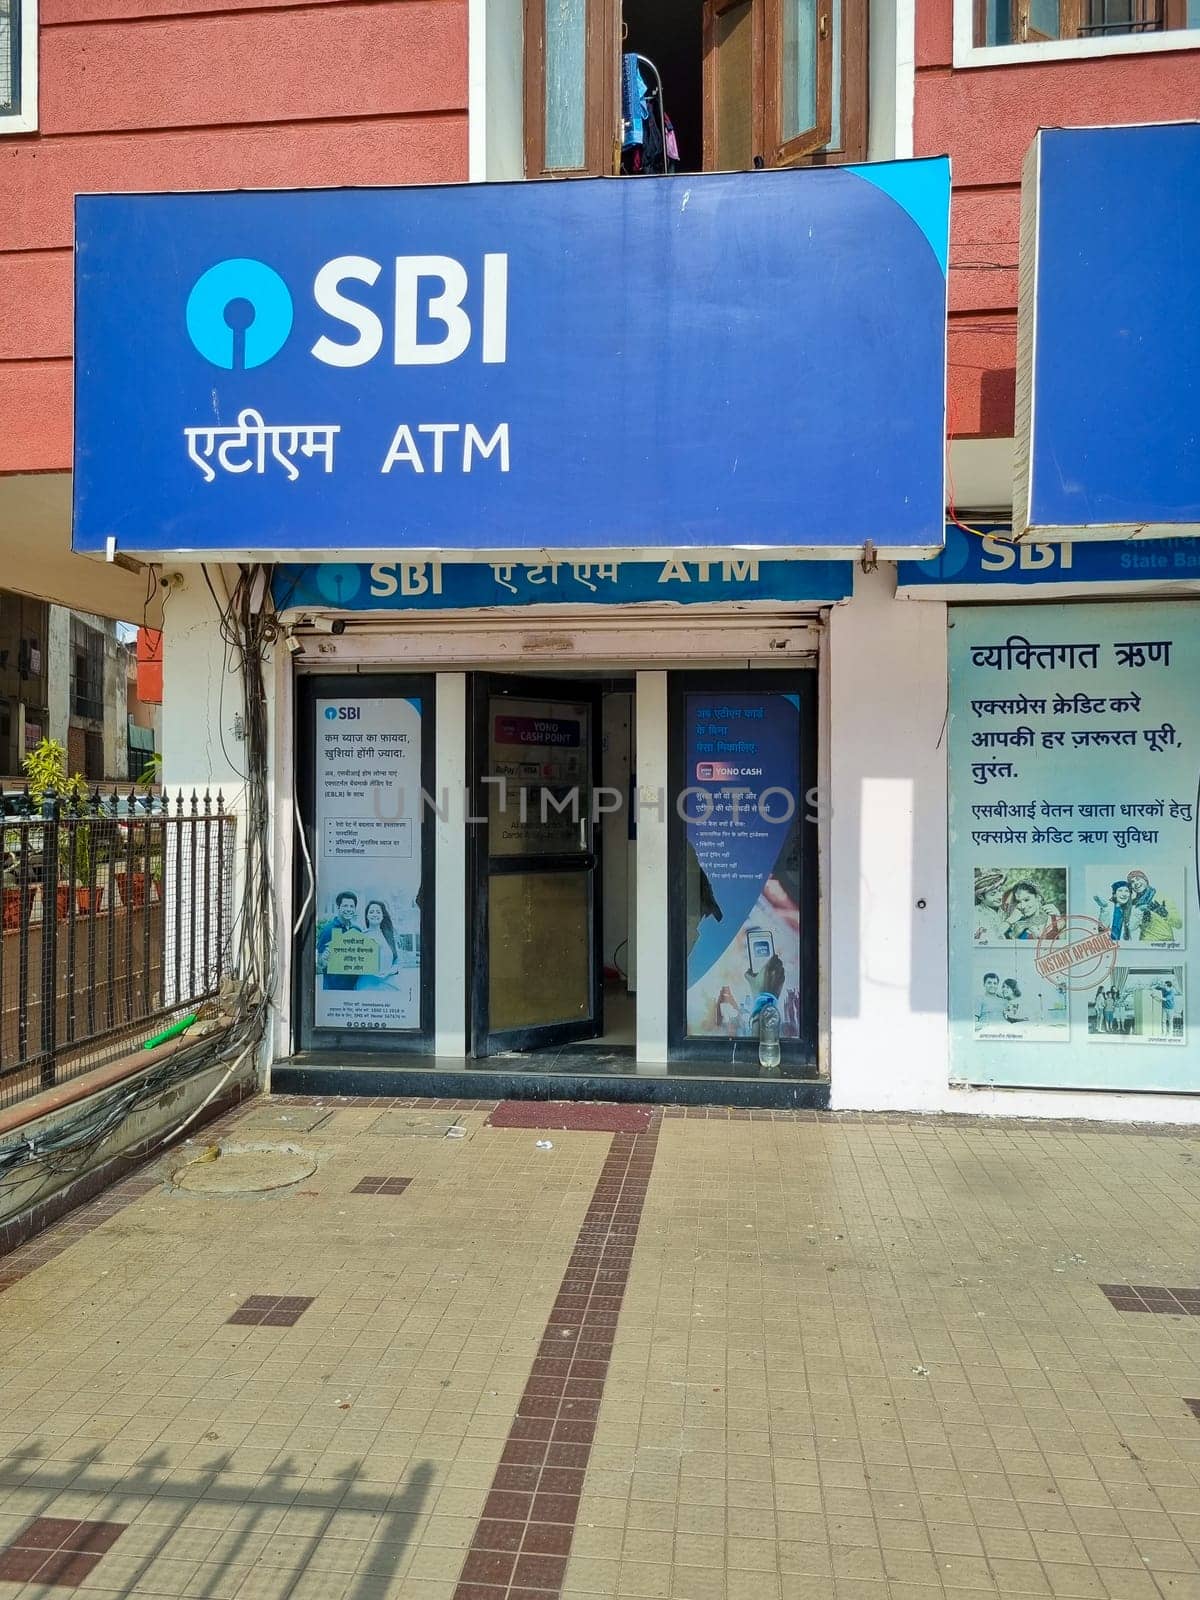 Massive bank sign of state bank of India SBI a public sector government controlled bank built for the welfare of people by Shalinimathur